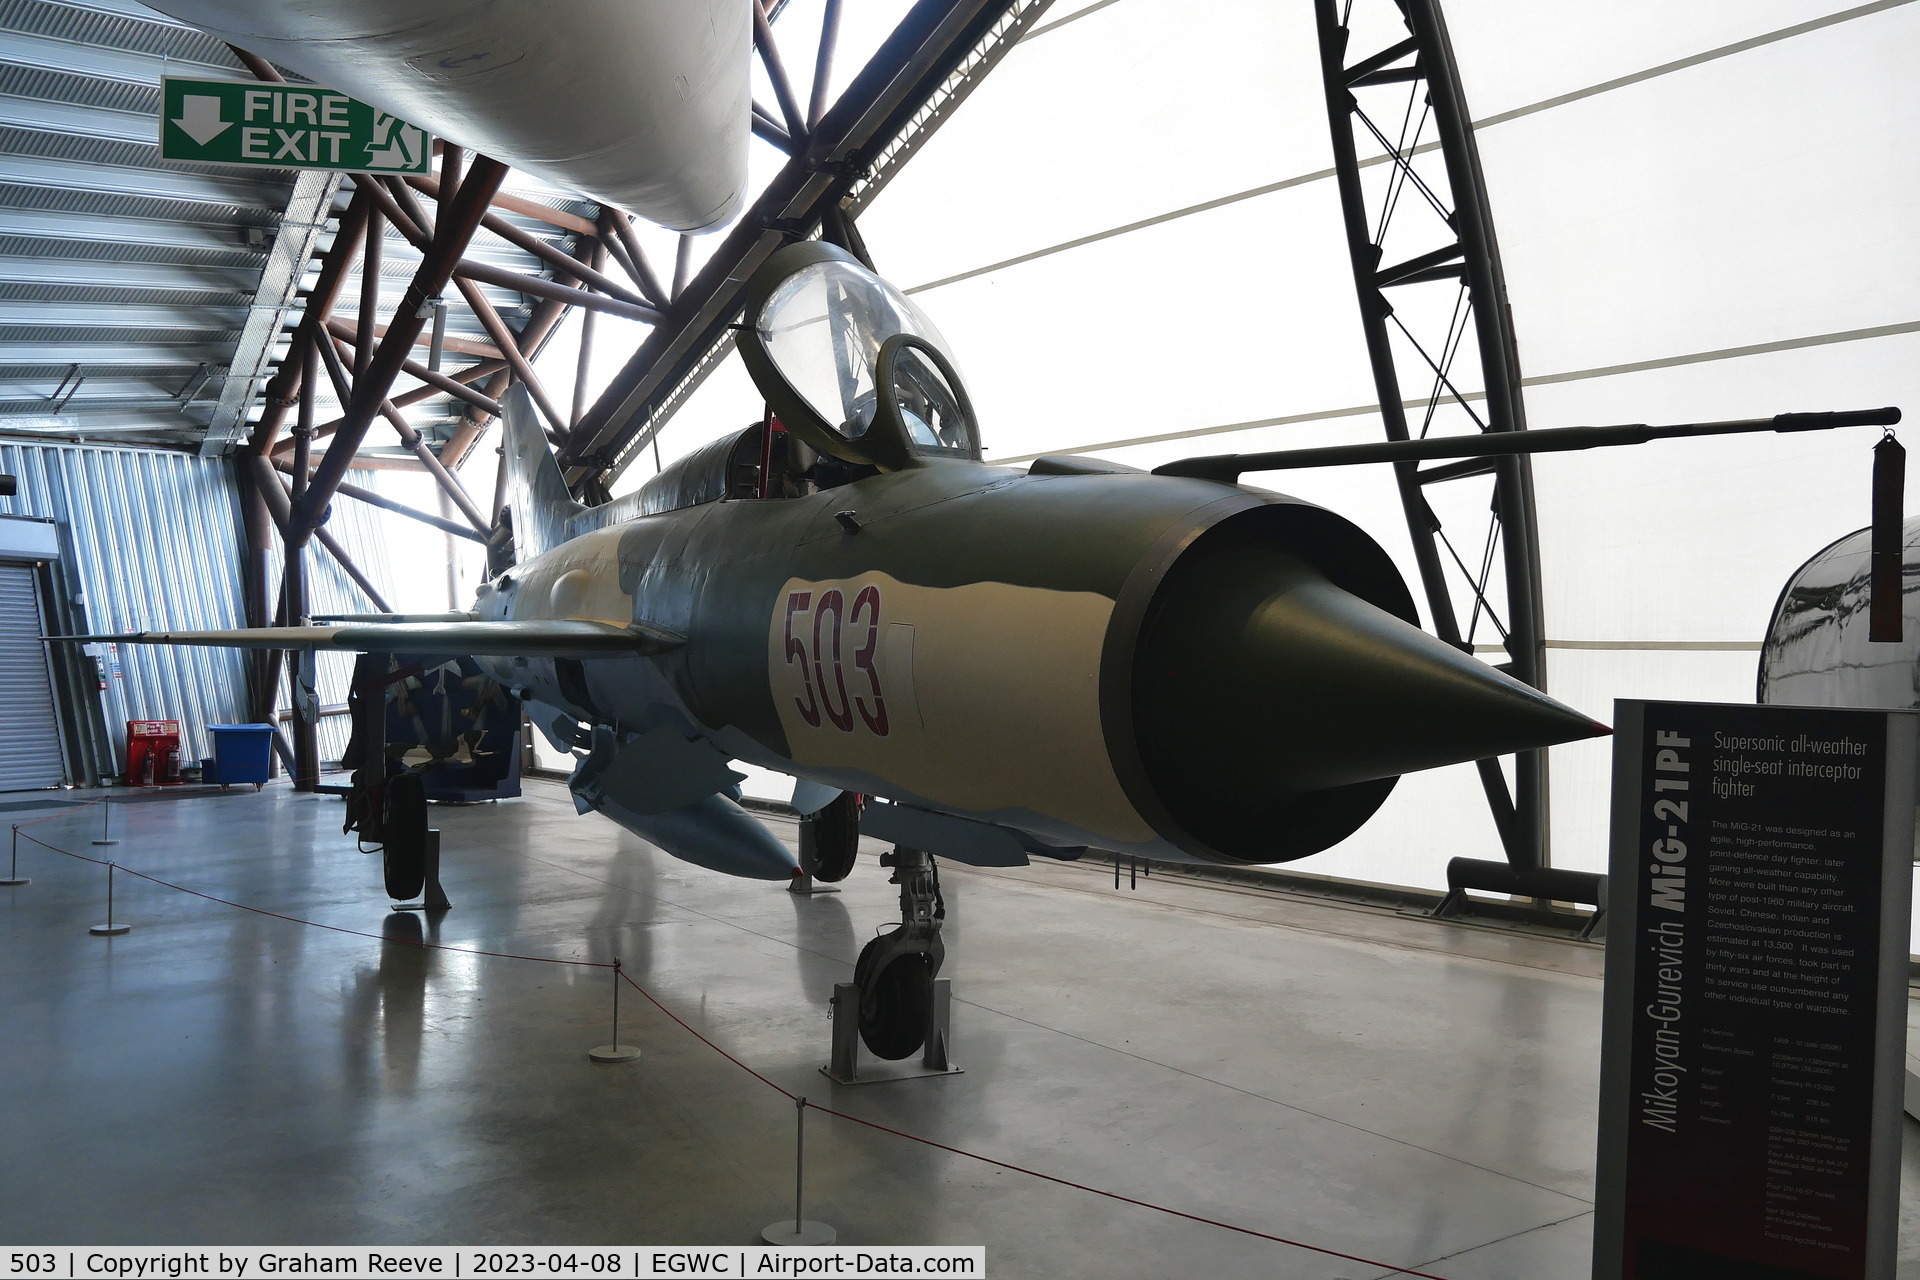 503, 1969 Mikoyan-Gurevich MiG-21M C/N 961503, On display at the RAF Museum, Cosford.